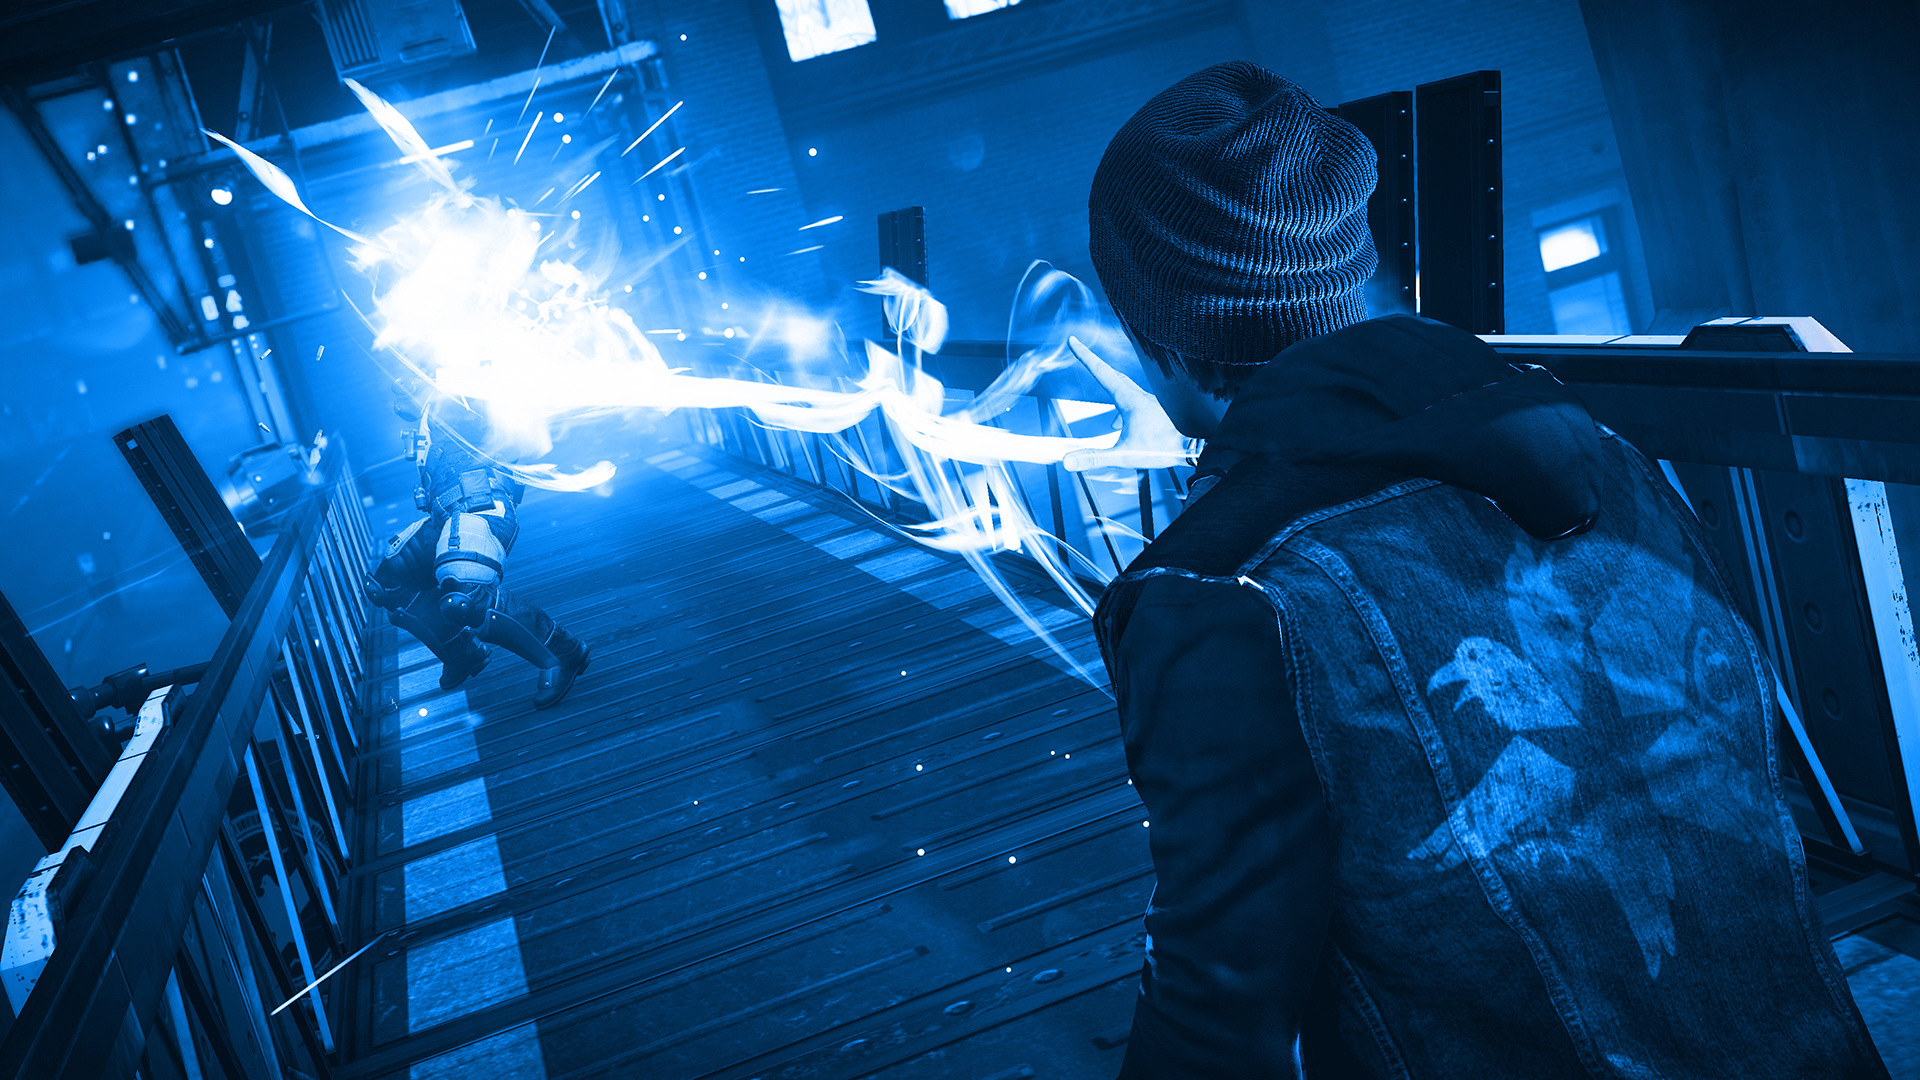 1920x1080 ... Infamous Second Son Blue Neon Wallpaper 13 by XtremisMaster